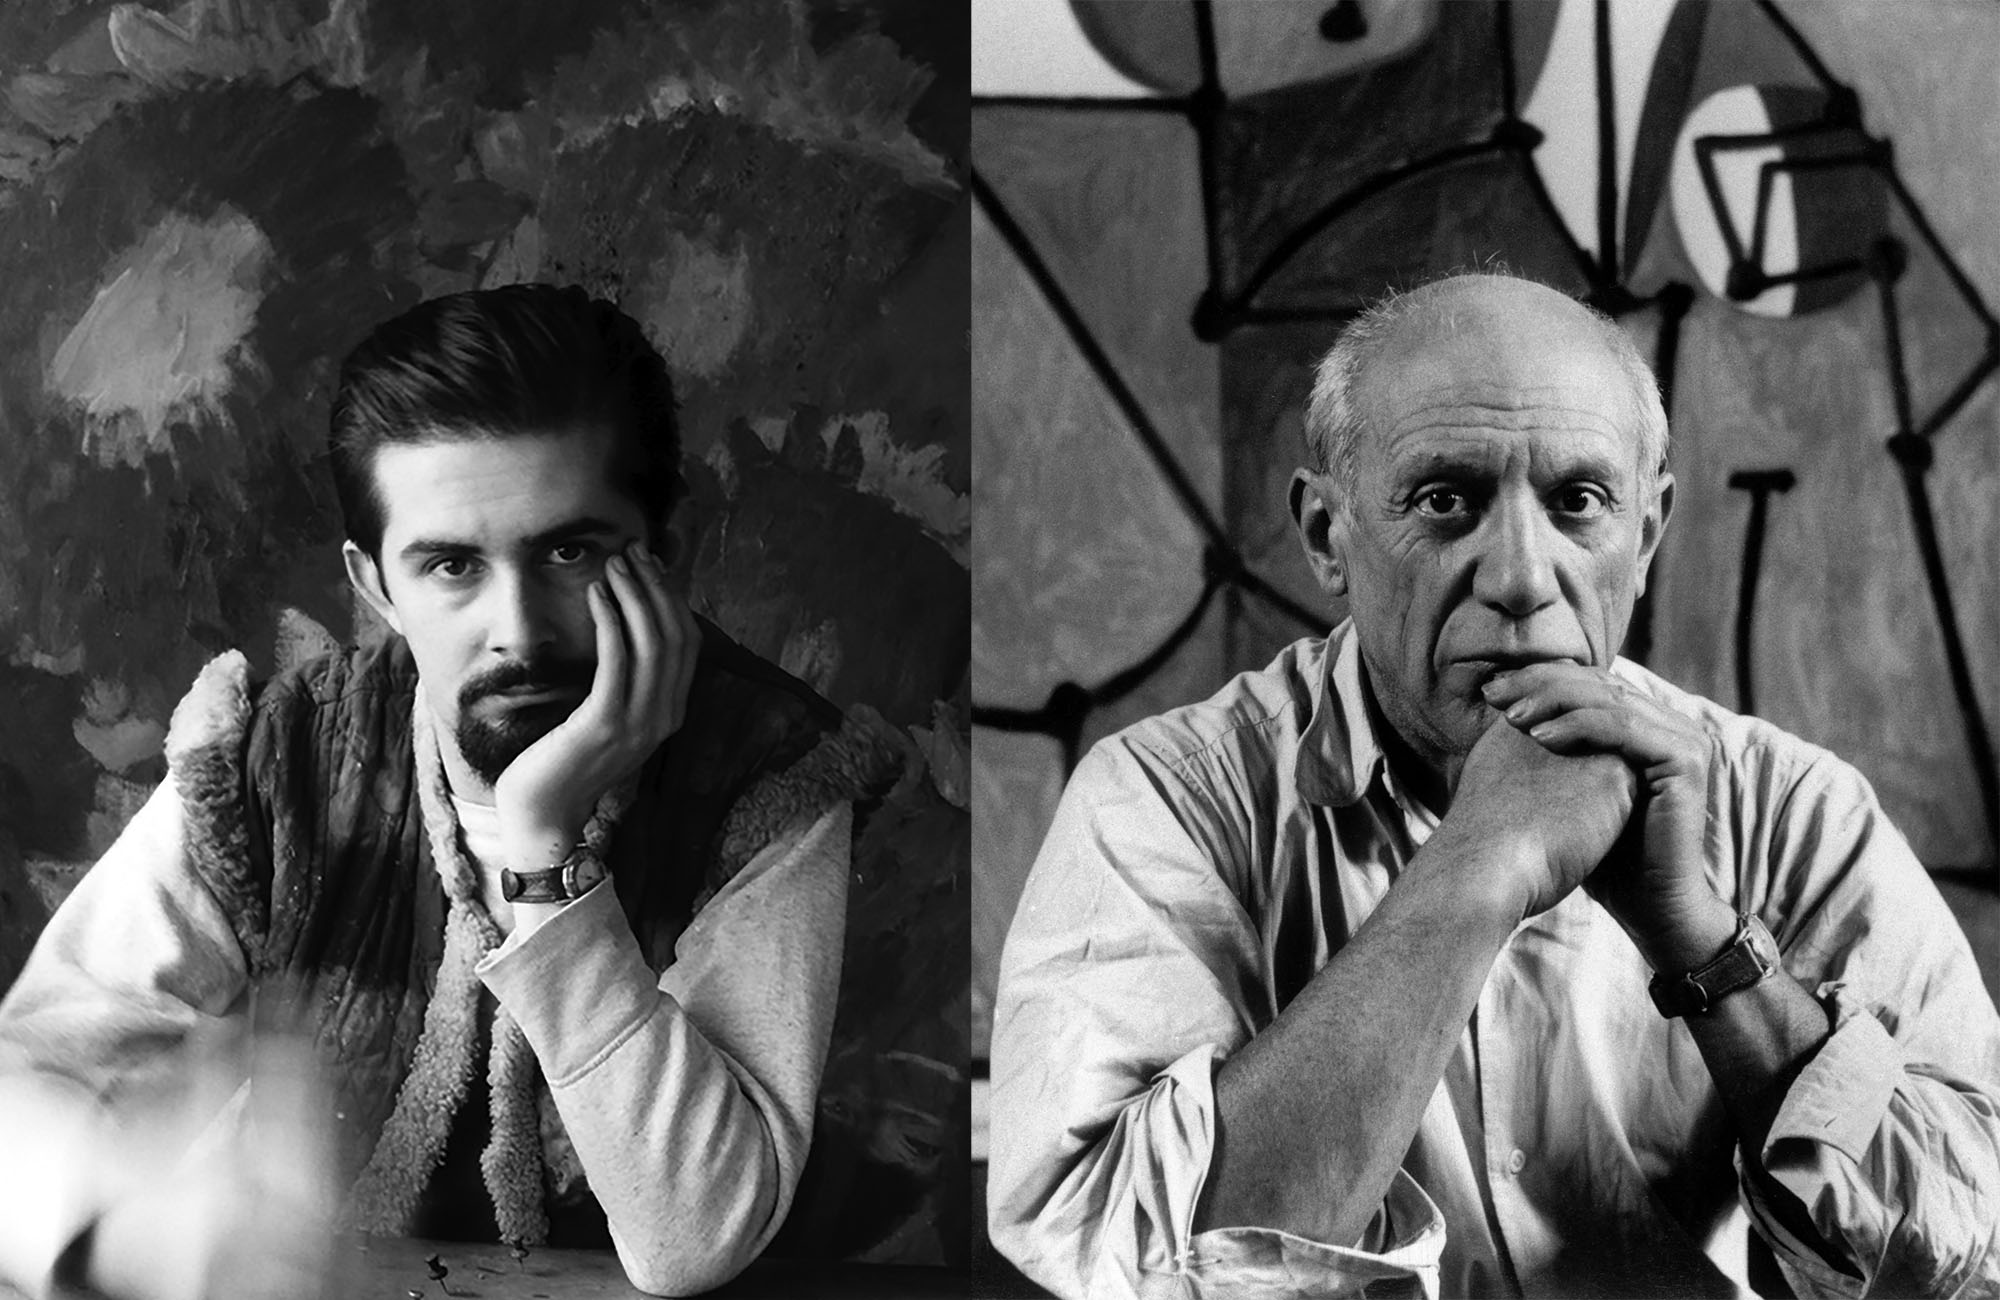 A diptych portrait of Fernando Botero in 1959 and Pablo Picasso in 1948. (Photos copyright Fernando Botero and Herbert List/Magnum Photos.)  